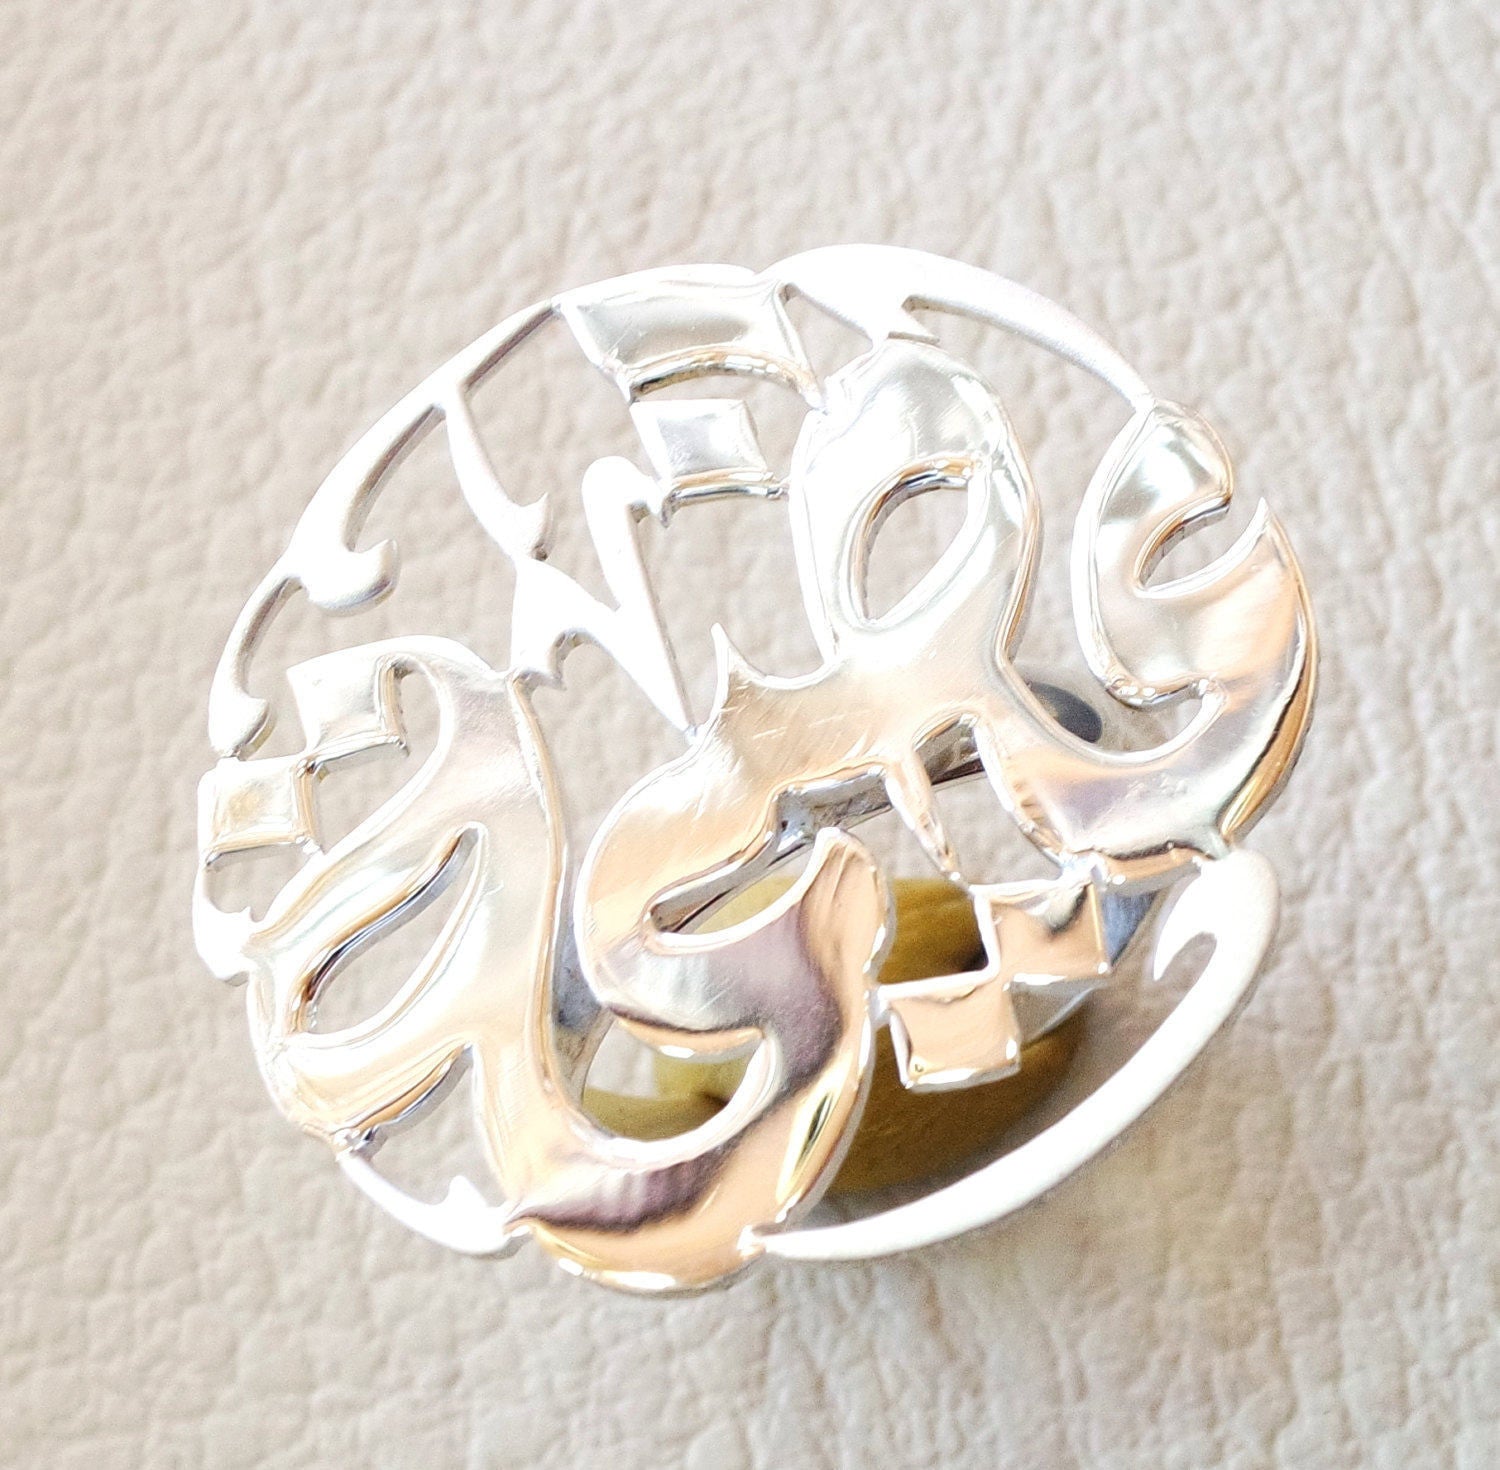 arabic calligraphy customized name sterling silver 925 high quality polishing ring round shape , fit all sizes any name خاتم اسماء عربي